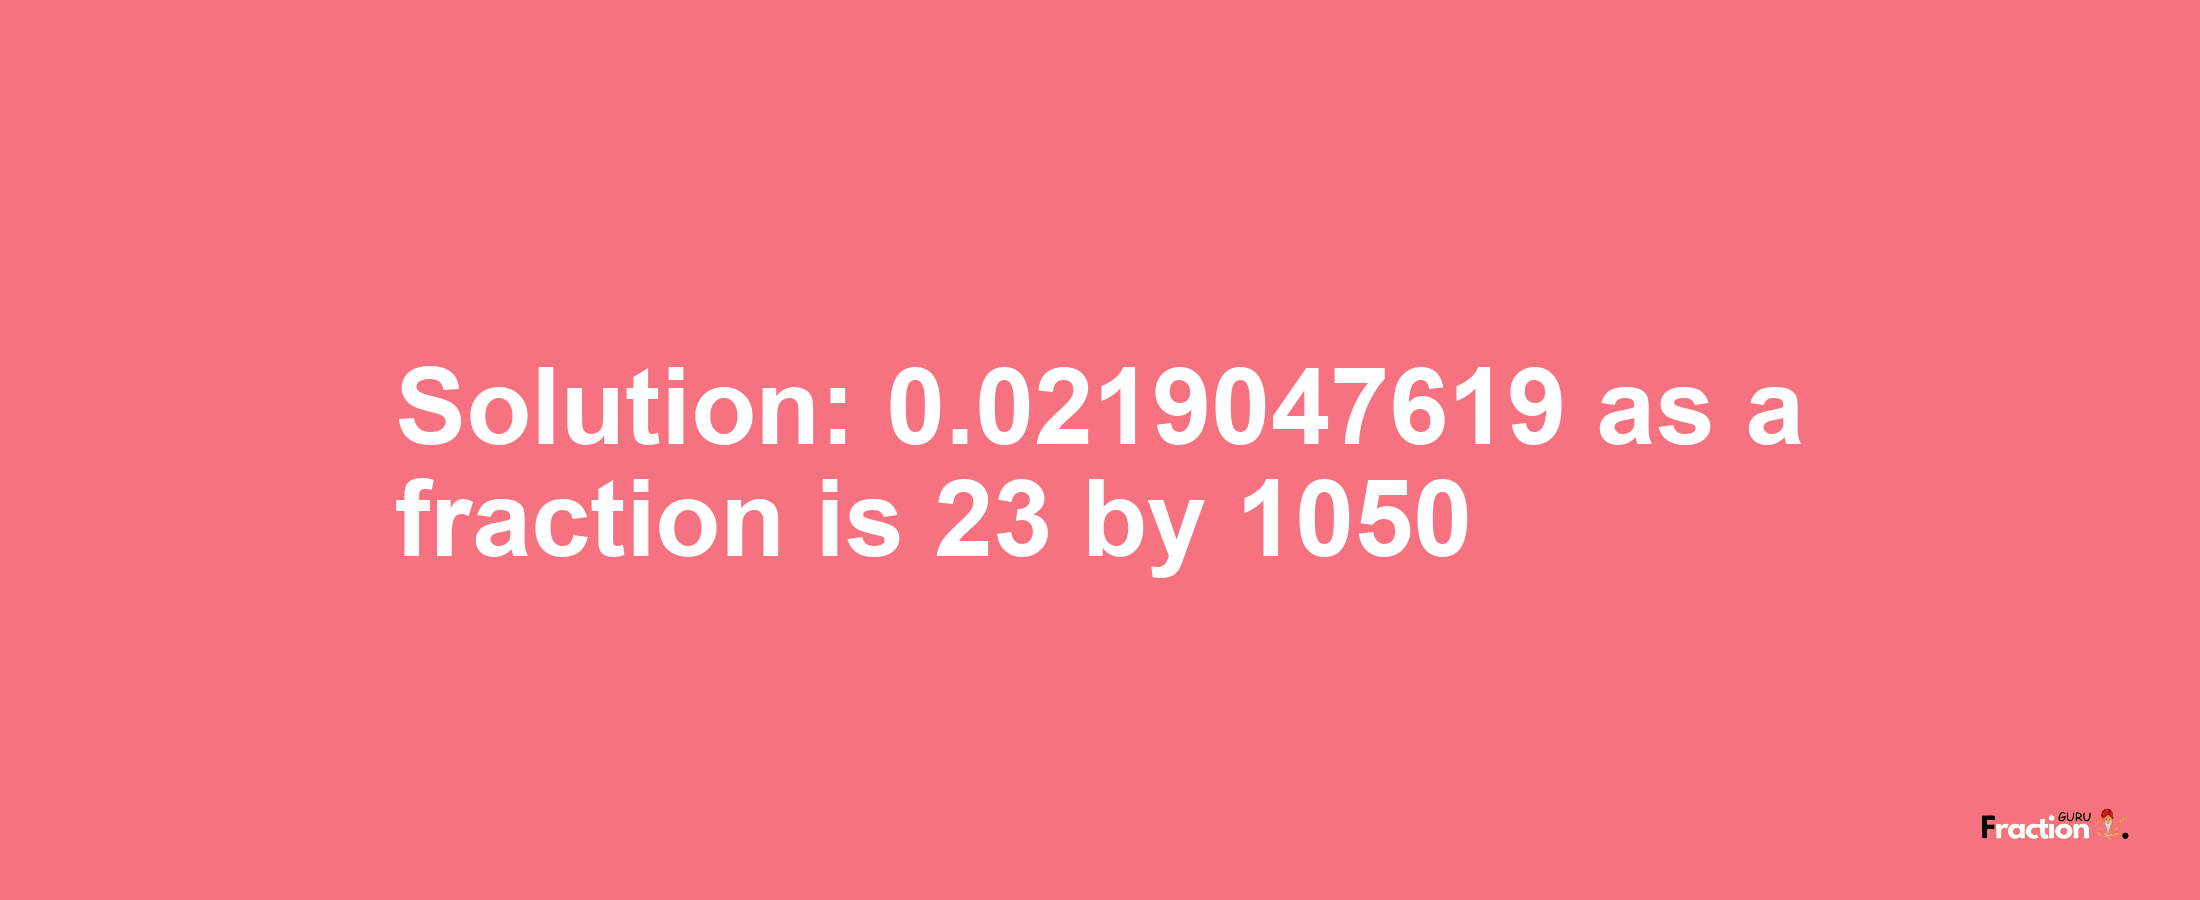 Solution:0.0219047619 as a fraction is 23/1050